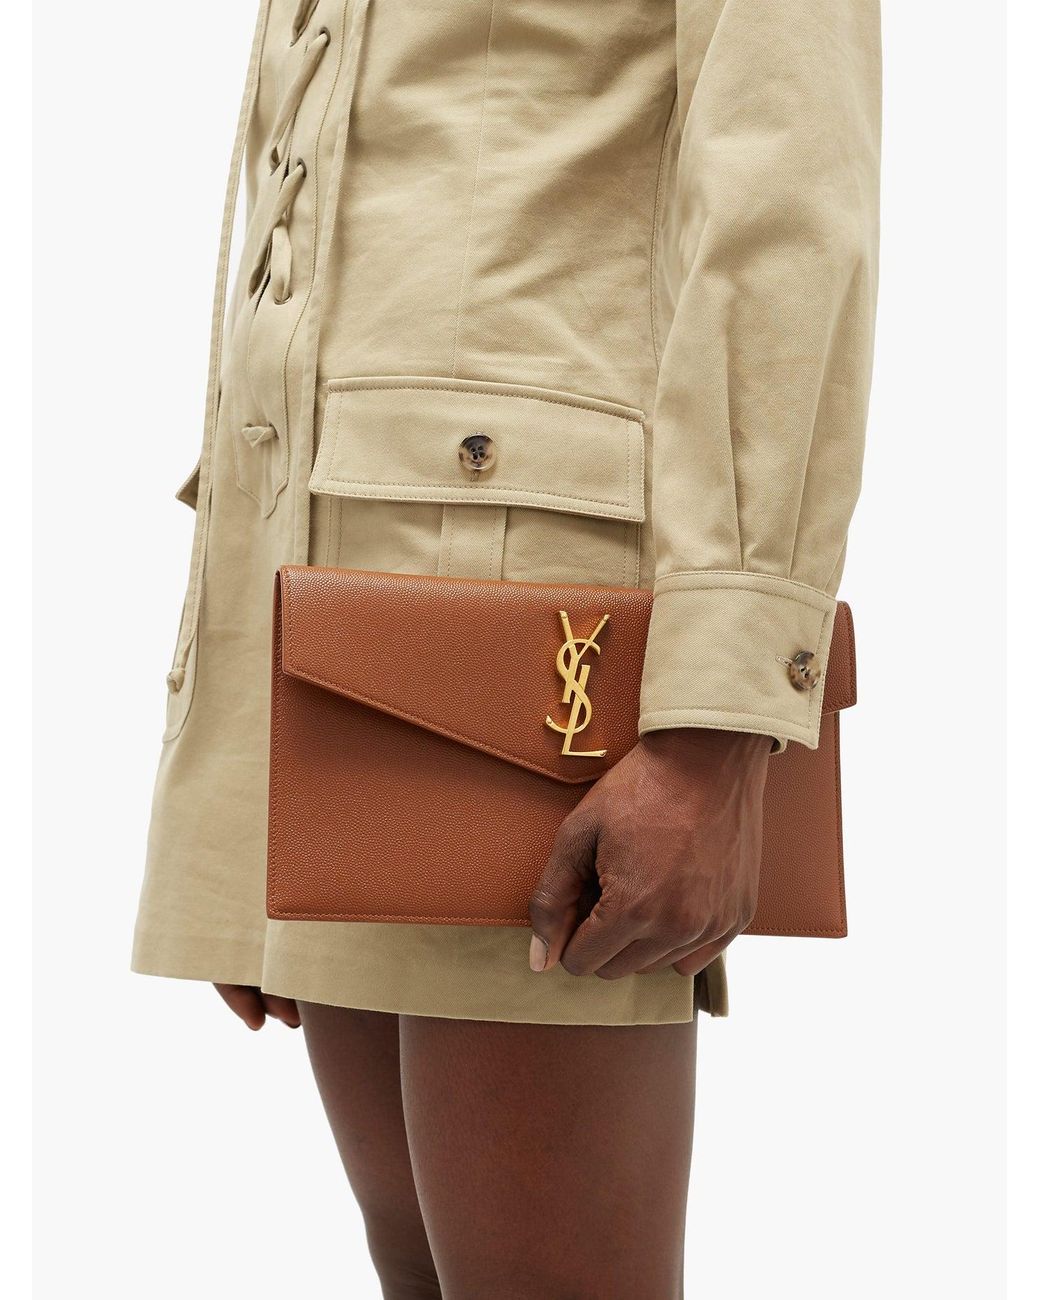 Why The YSL Uptown Pouch Is The Perfect Clutch - Christinabtv